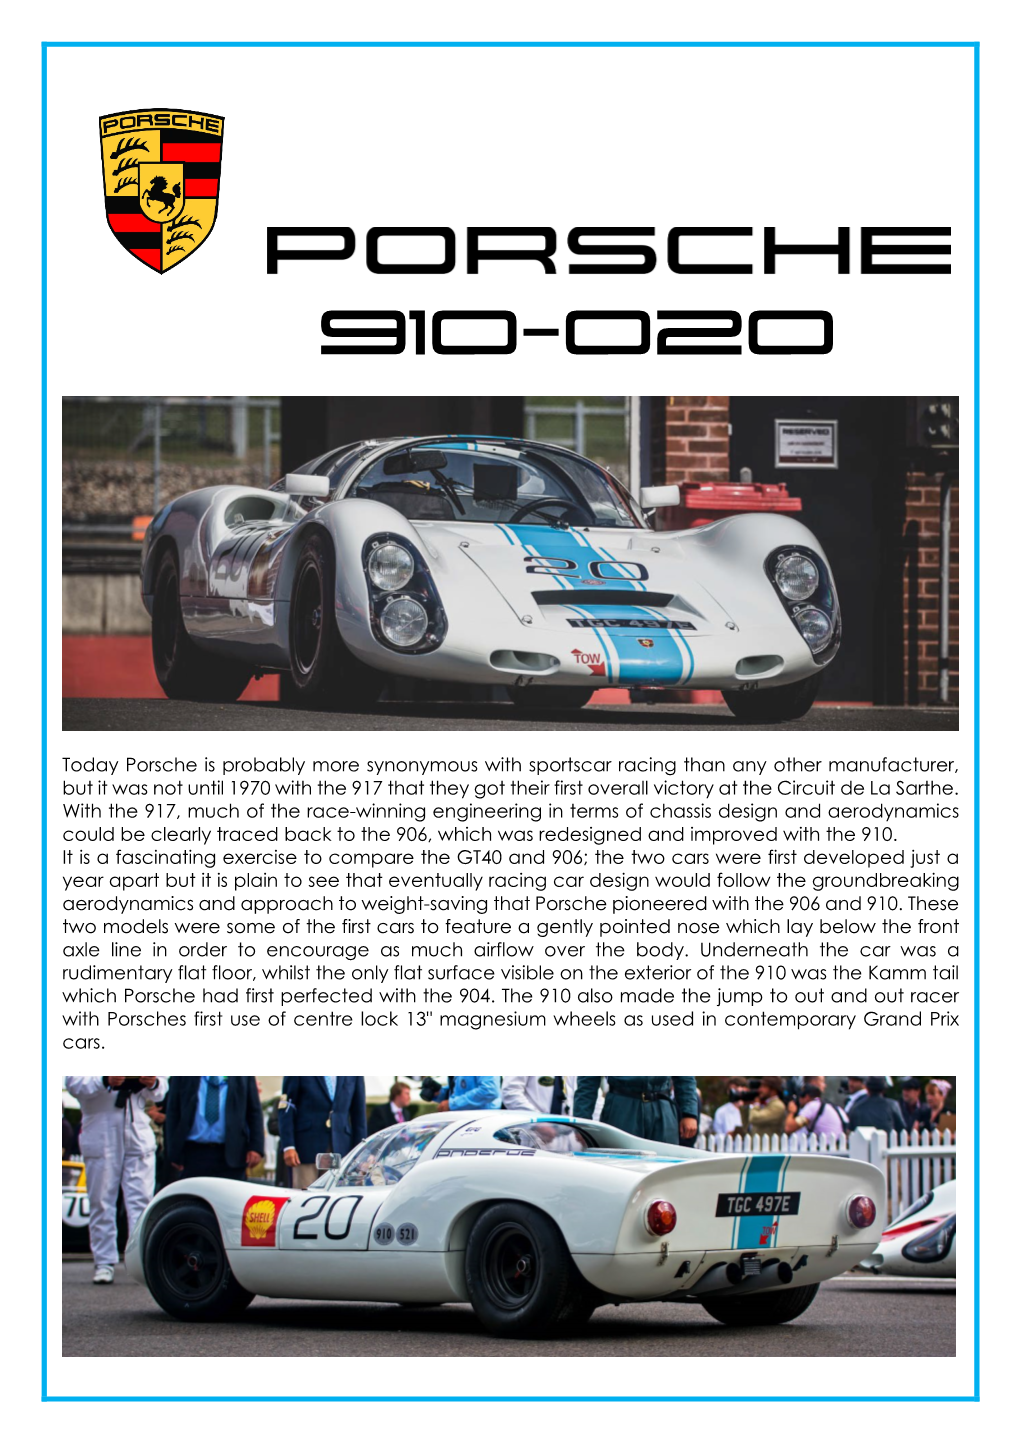 Today Porsche Is Probably More Synonymous with Sportscar Racing